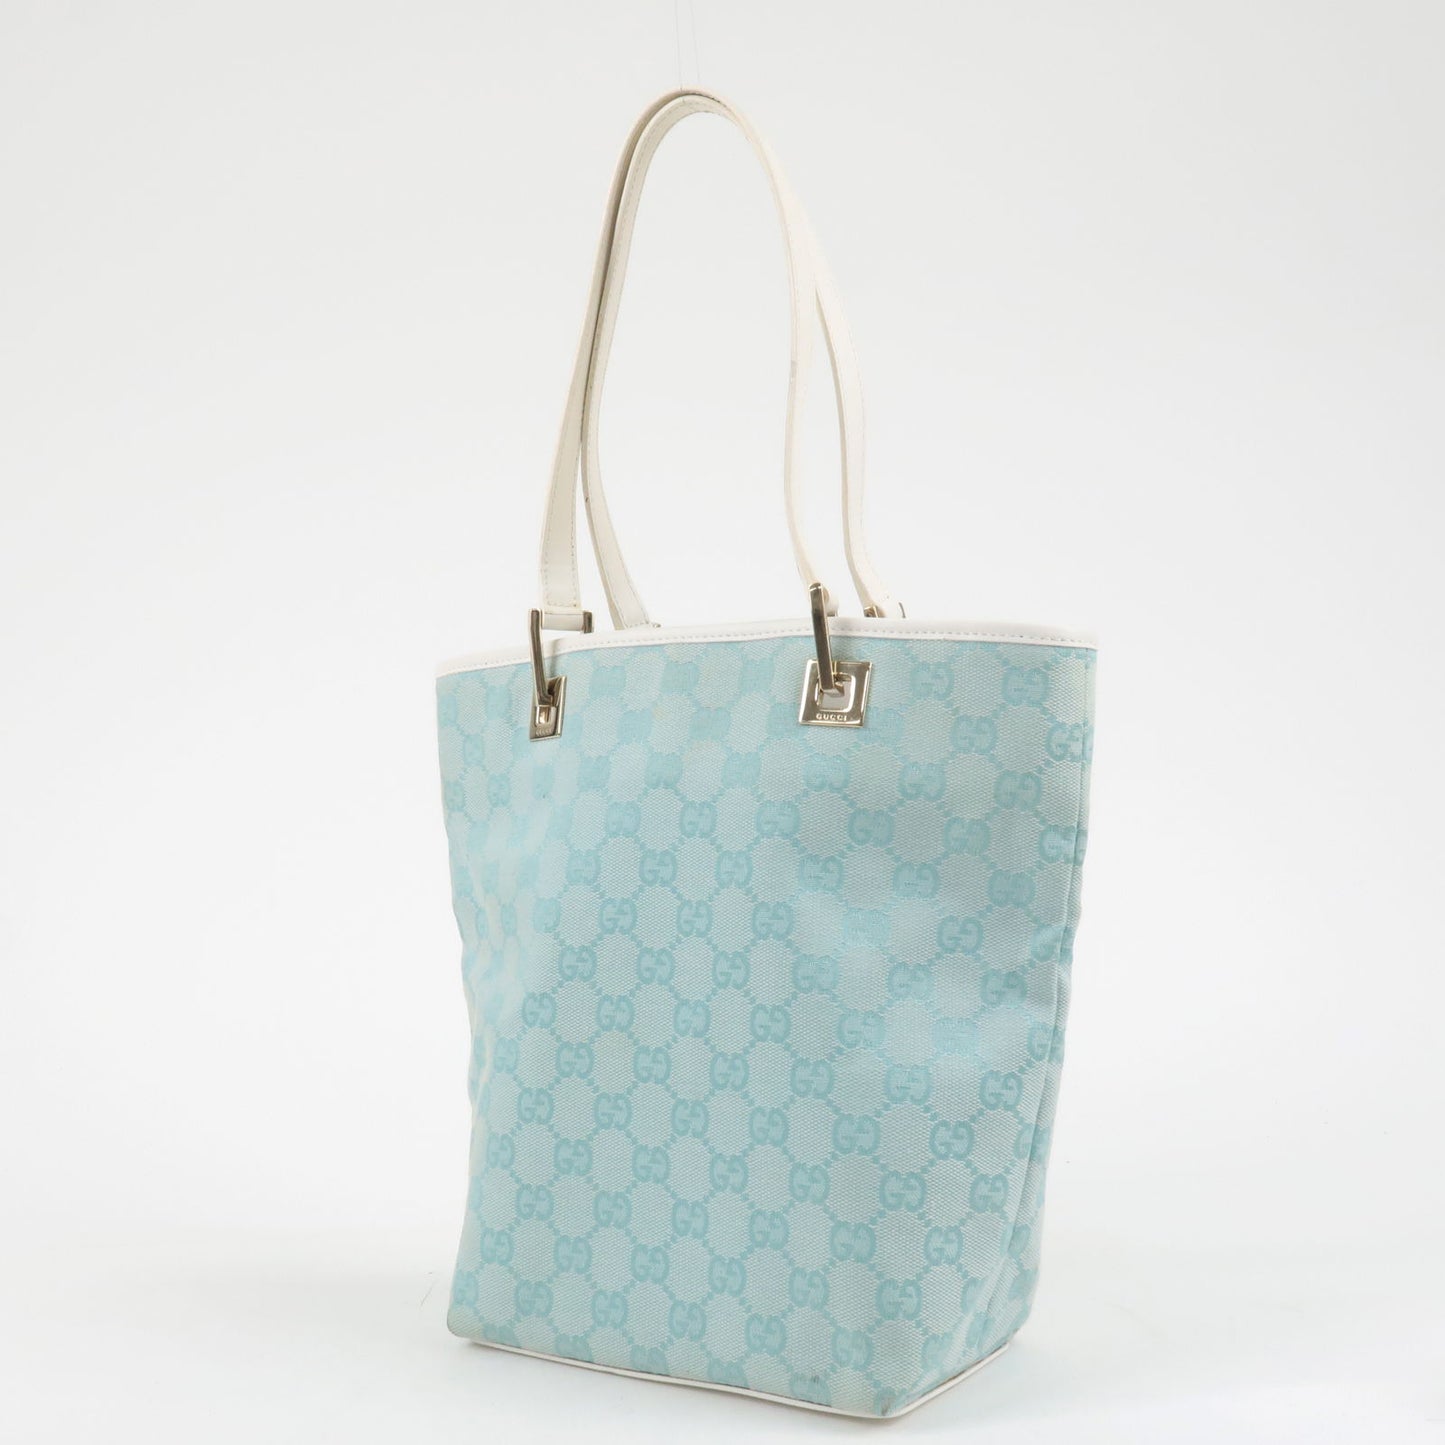 GUCCI GG Canvas Leather Tote Bag Light Blue 002.1099